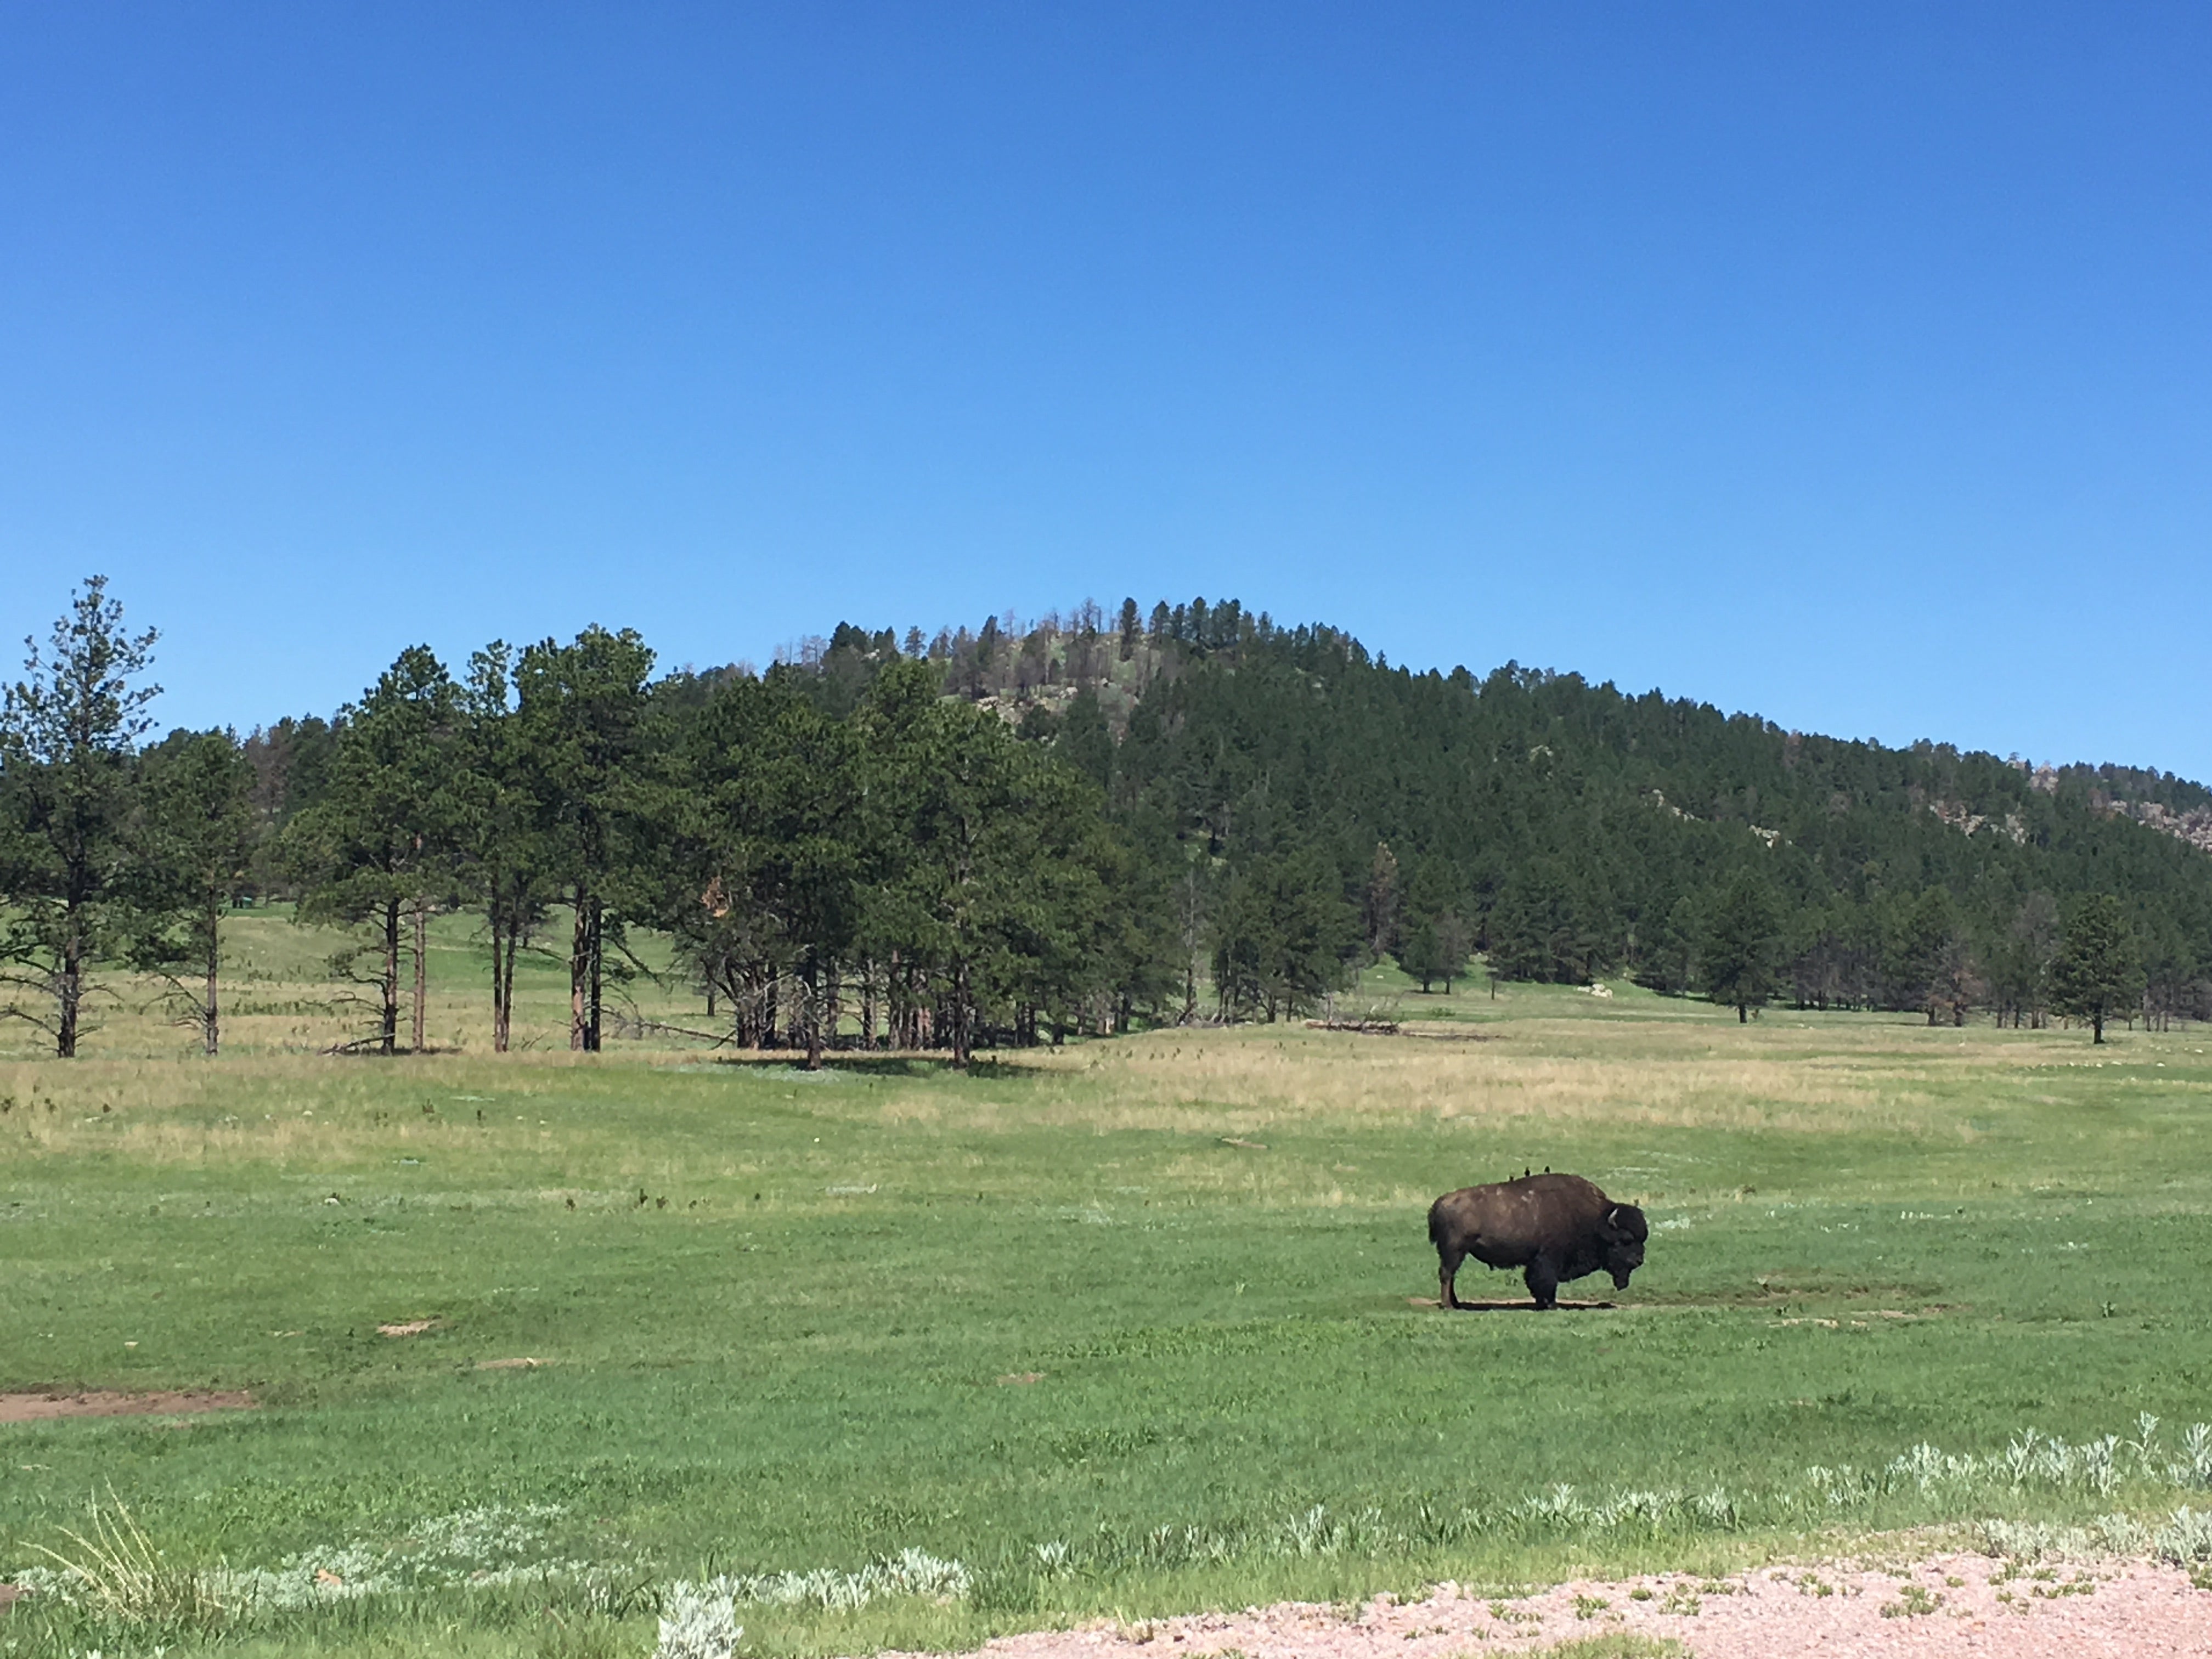 Bison are easy to find throughout the park.